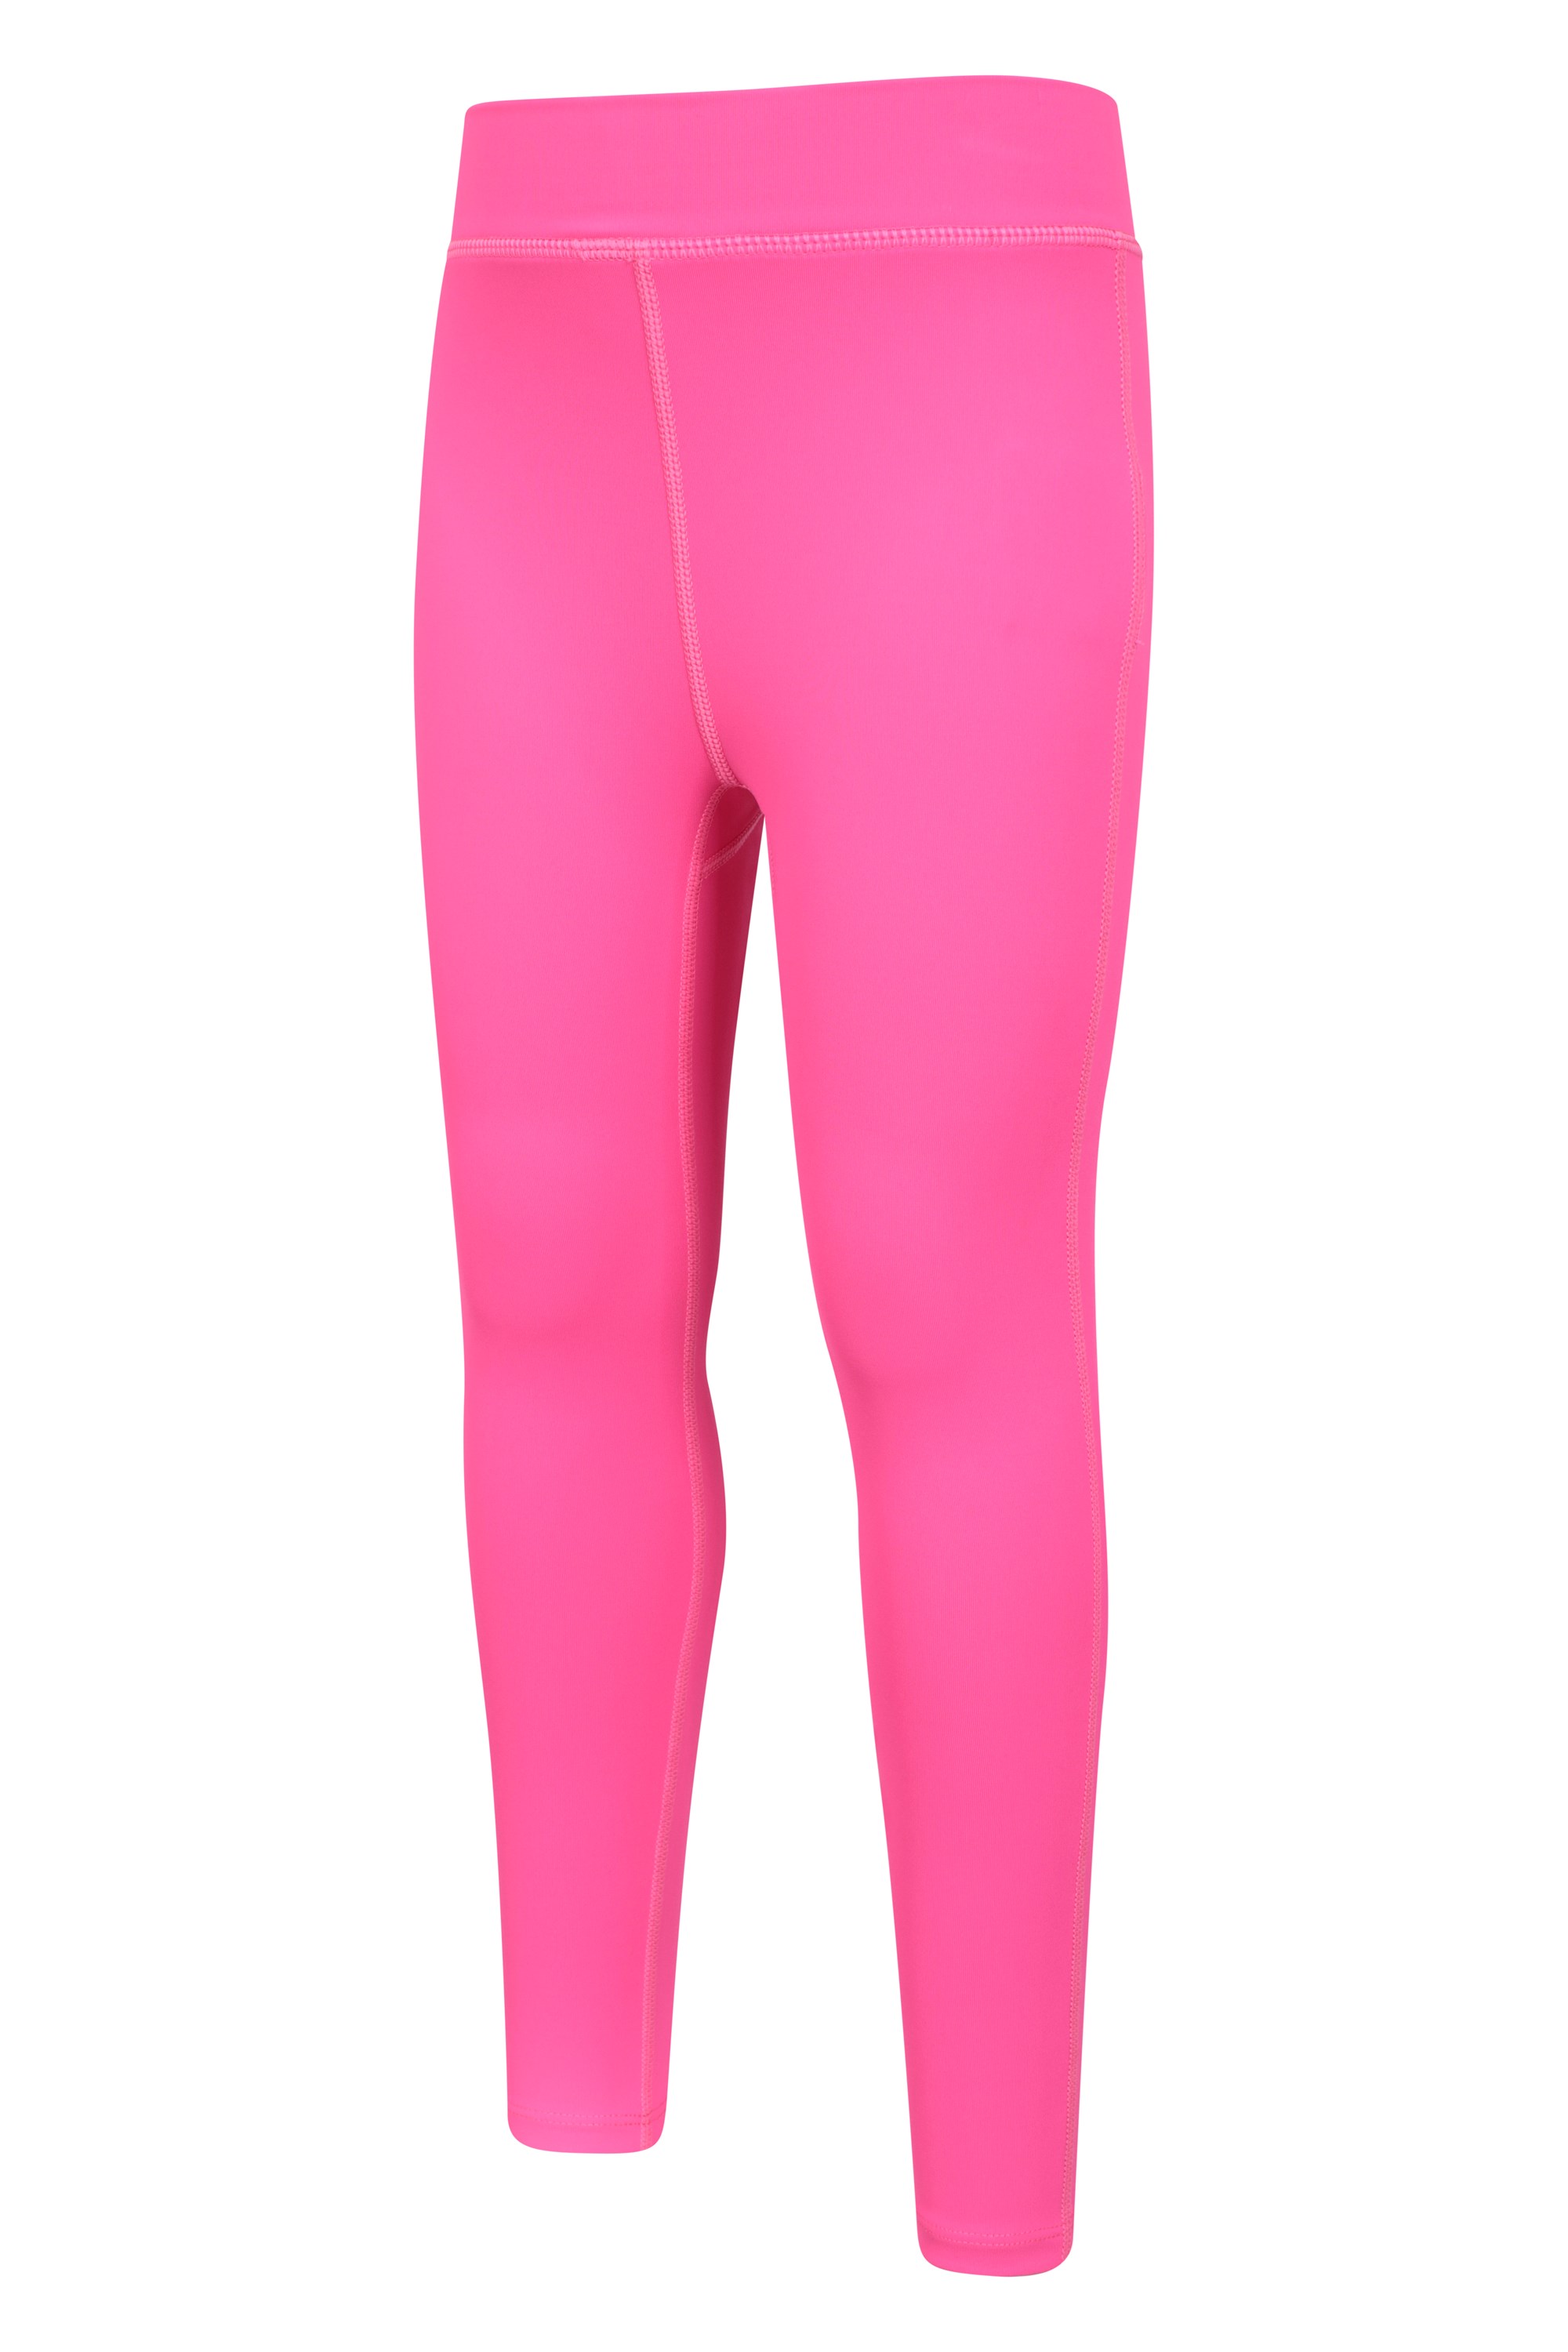 Official UNDRGROUND Zipped Leggings in Dusty Pink at ShoeGrab